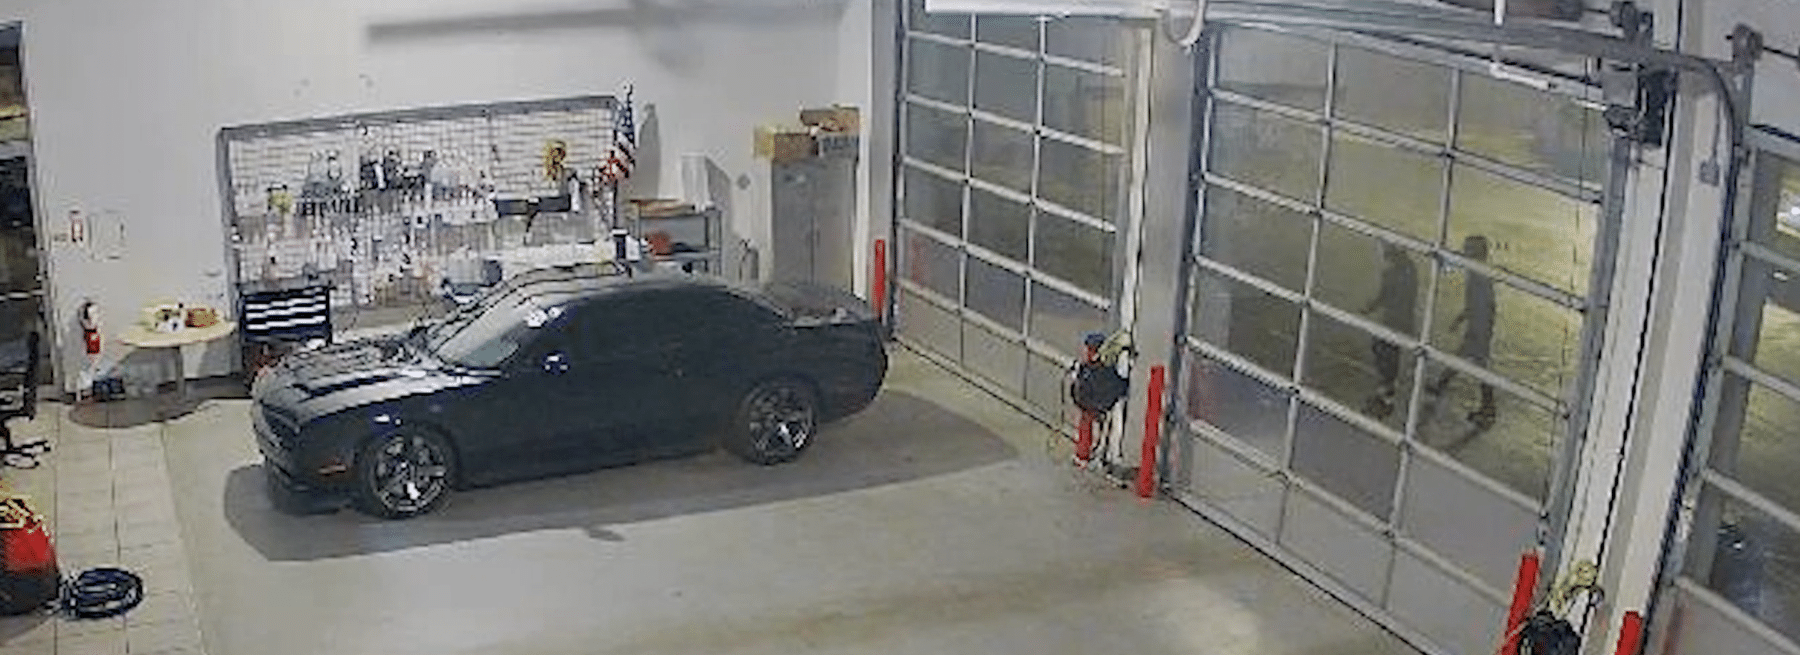 Trespassers at Auto Dealership Chased Down Hero